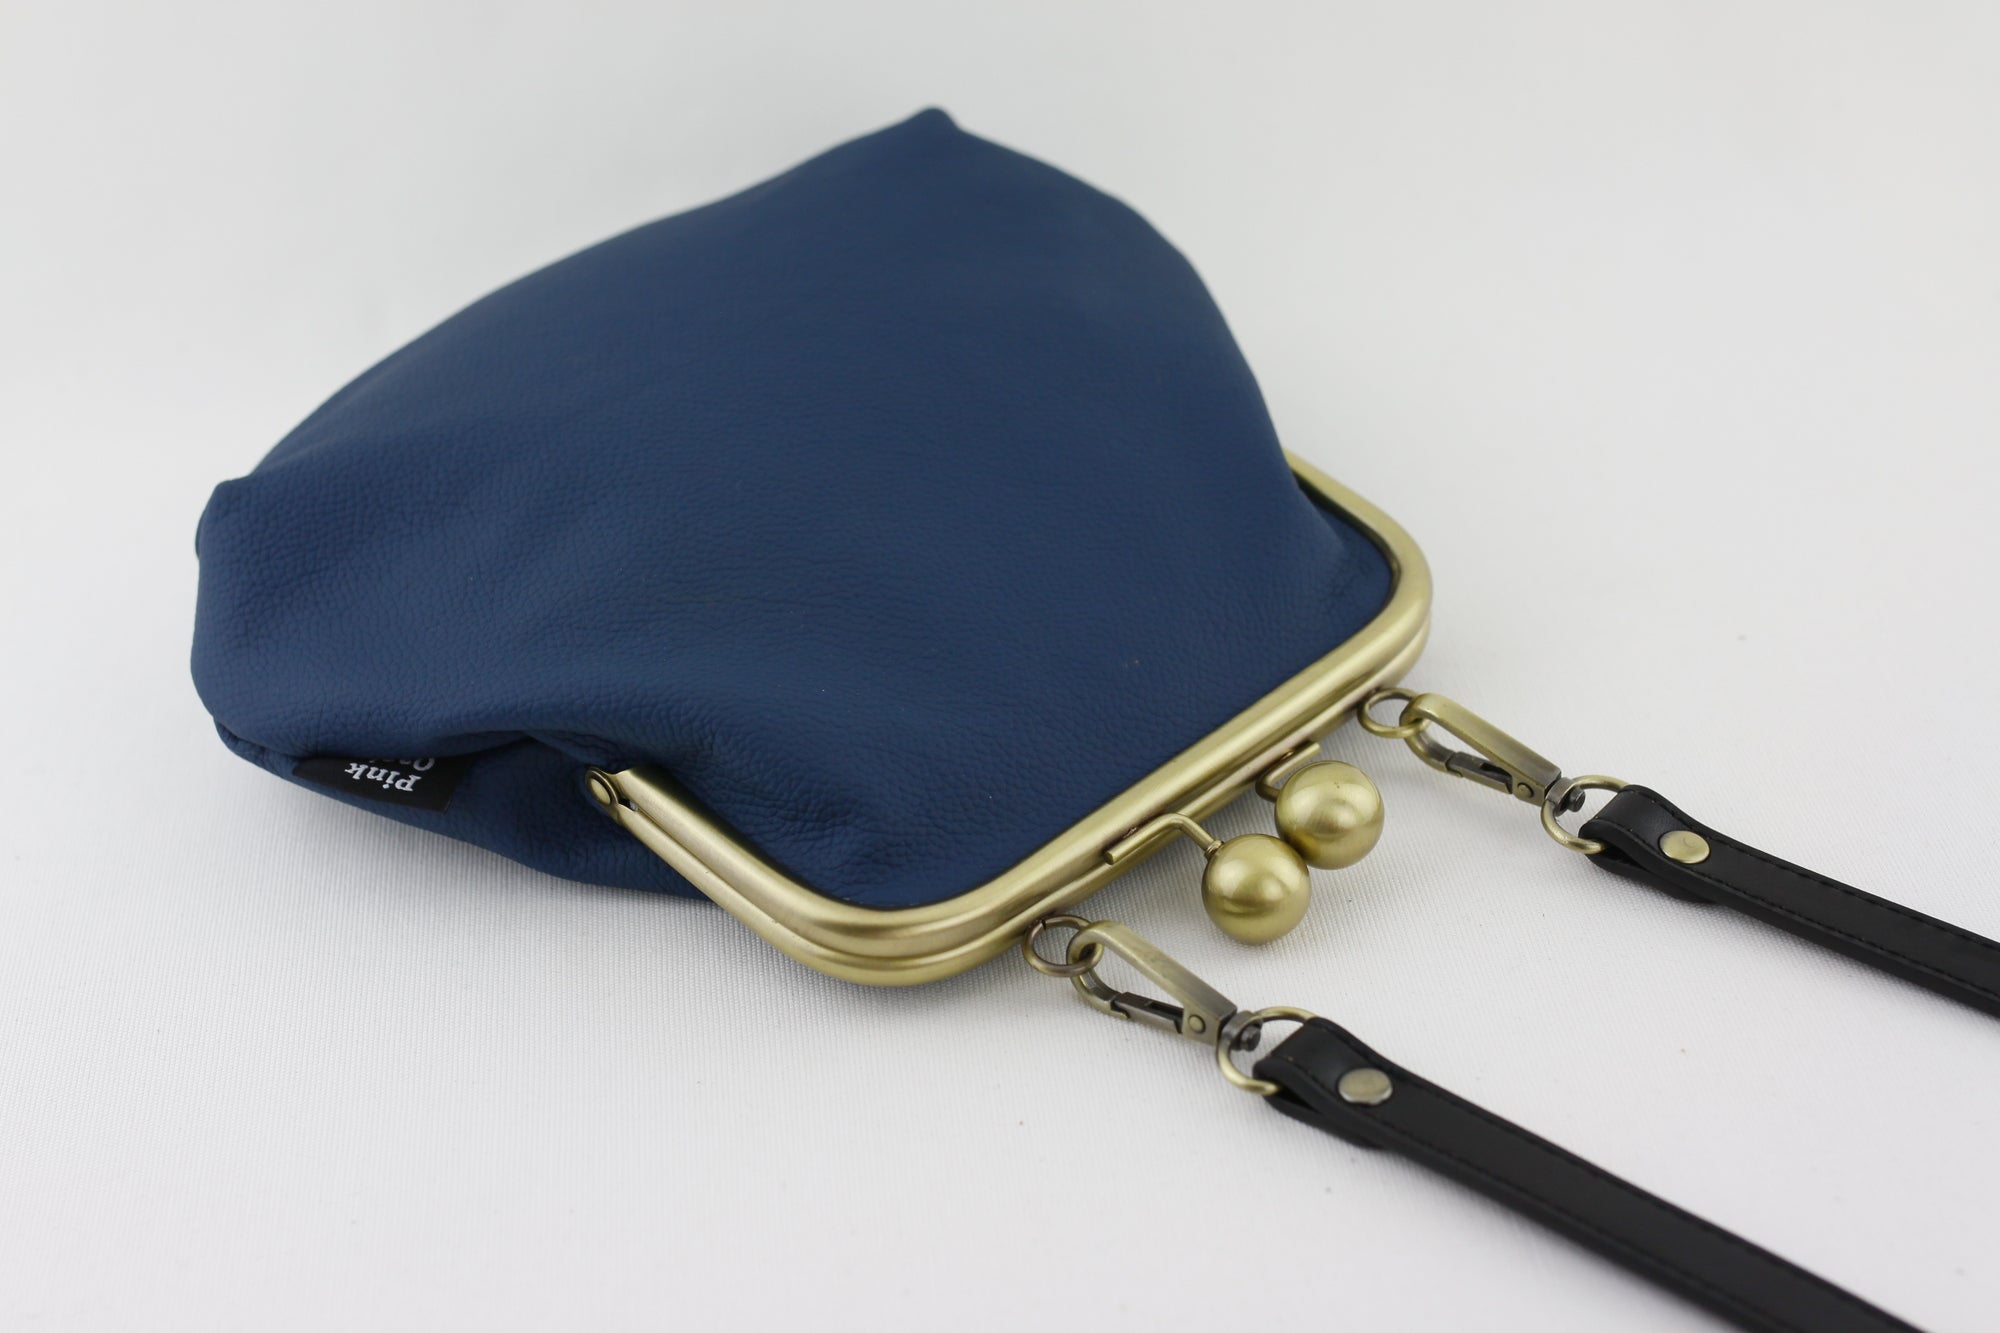 Peacock Blue Leather Kisslock Bag with Strap  | PINKOASIS